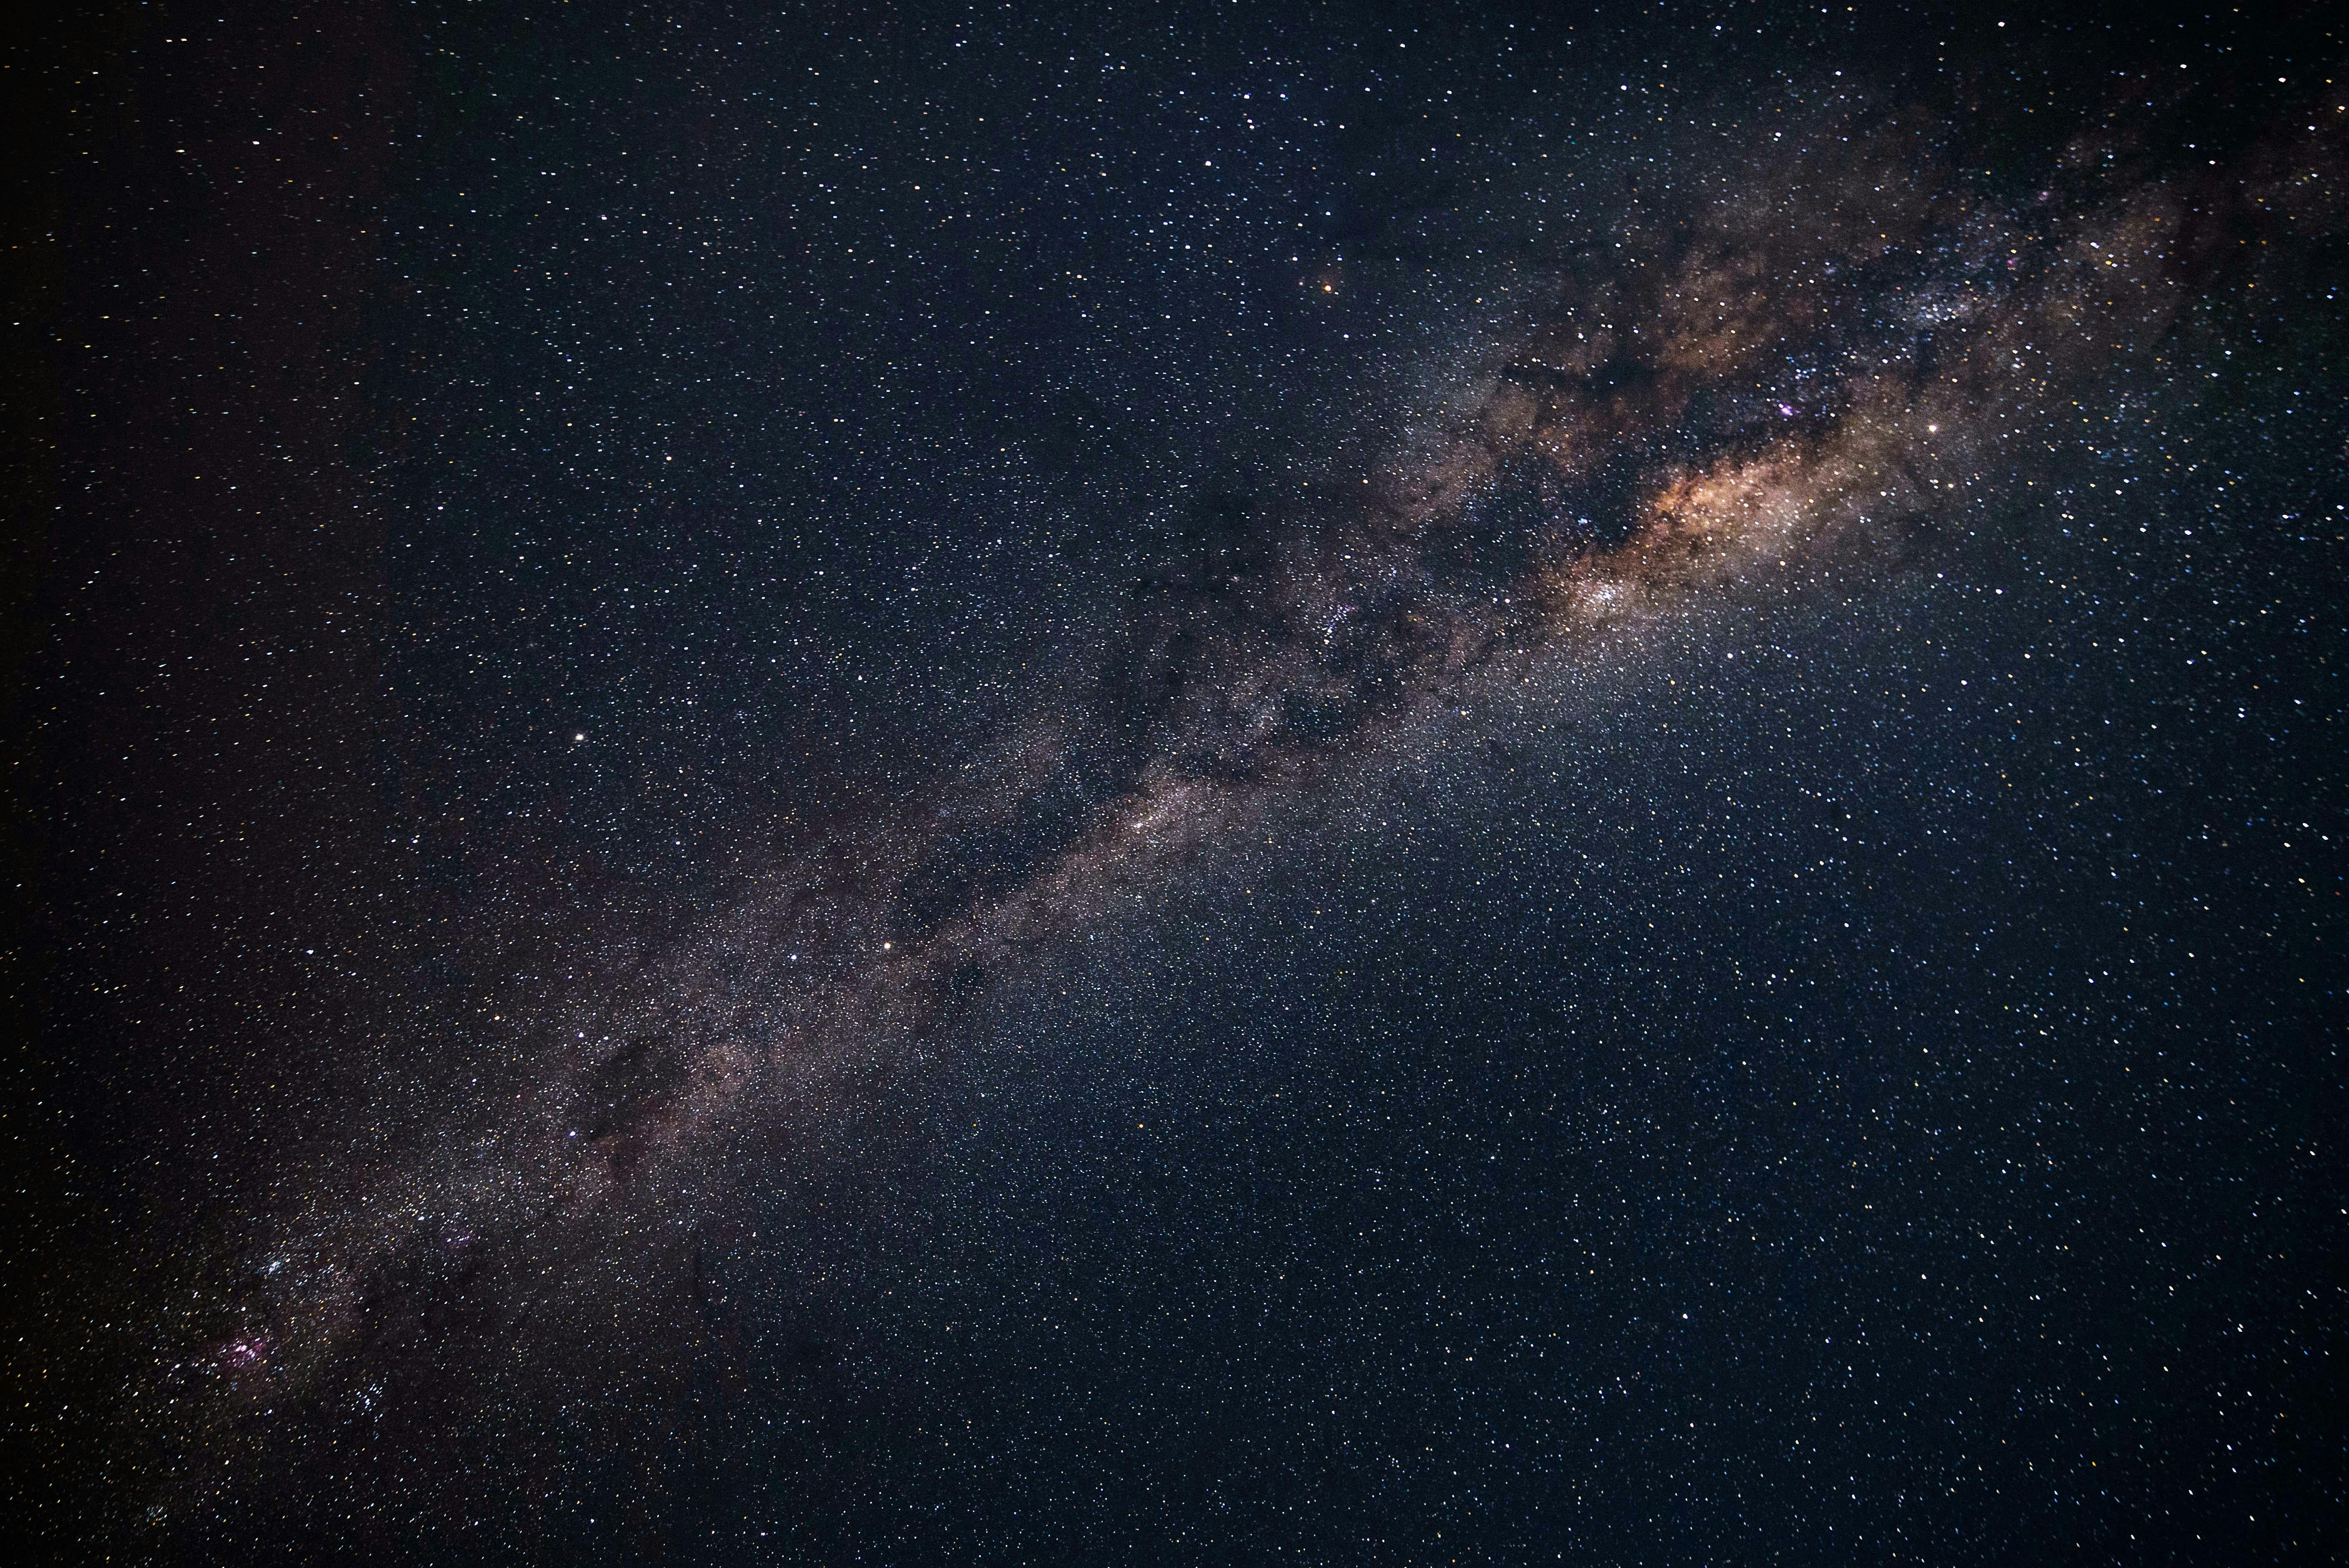 Milky Way Photos, Download The BEST Free Milky Way Stock Photos & HD Images